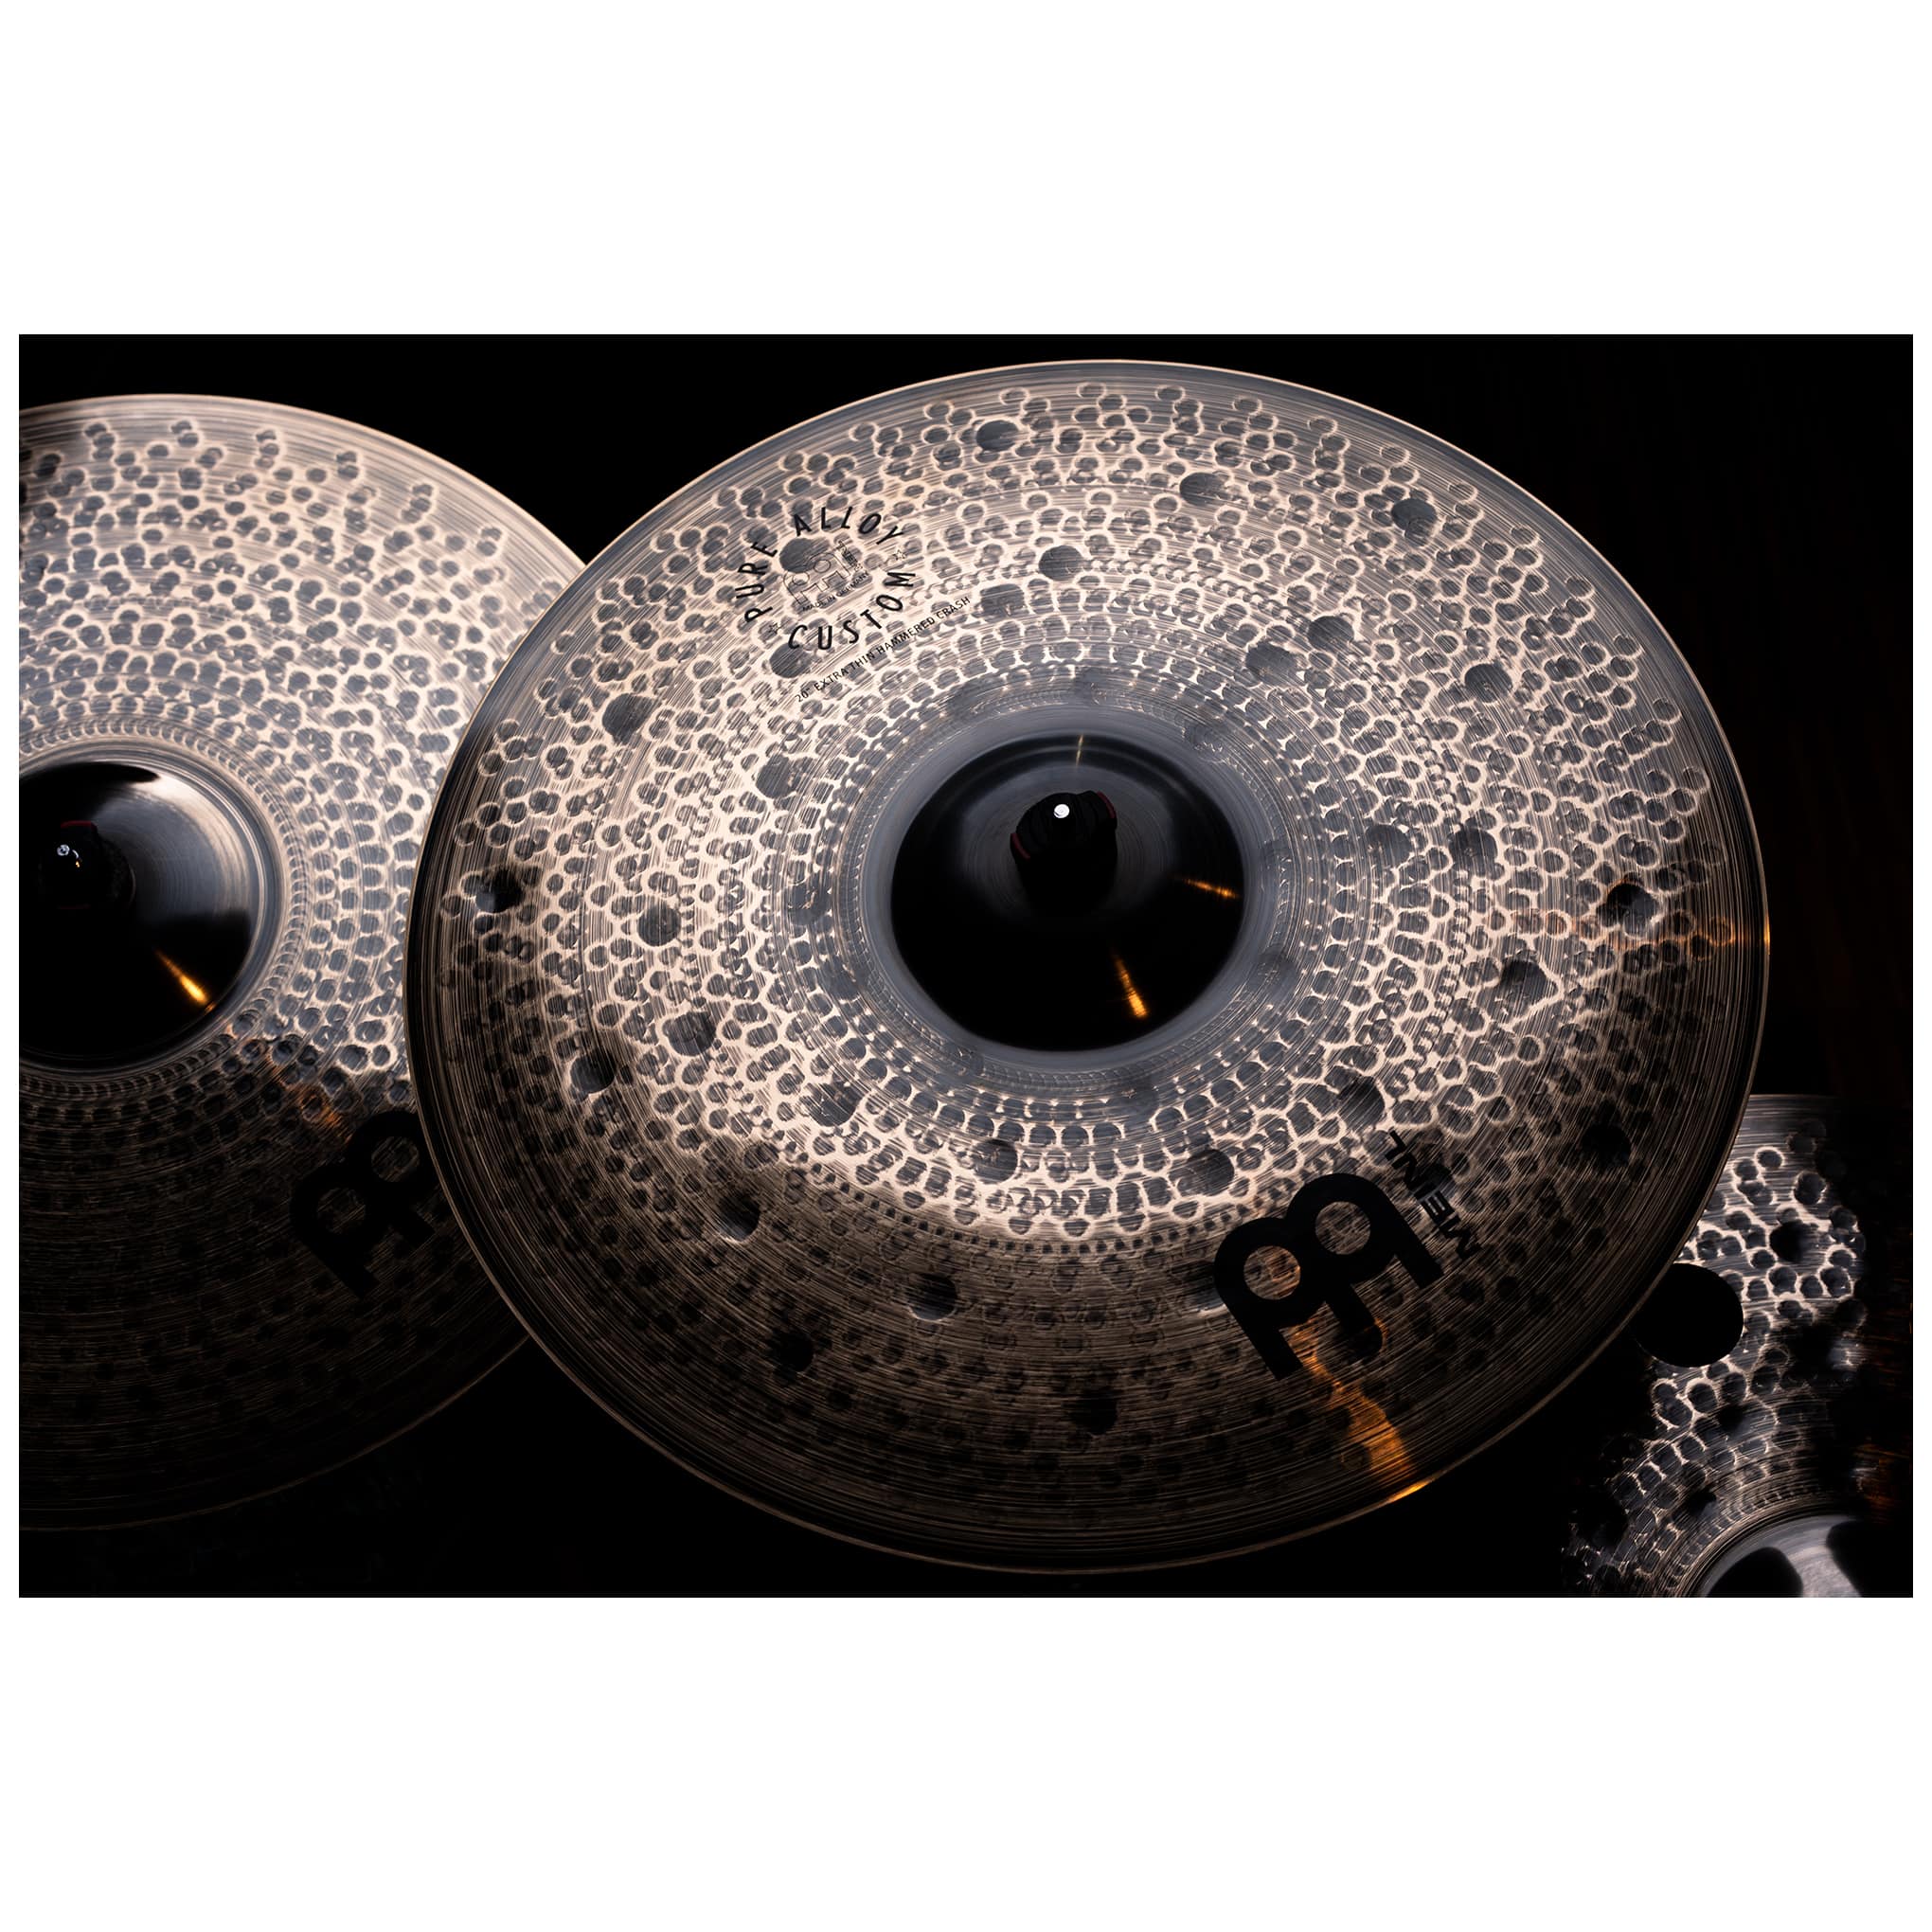 Meinl Cymbals PAC20ETHC - 20" Pure Alloy Custom Extra Thin Hammered Crash 10